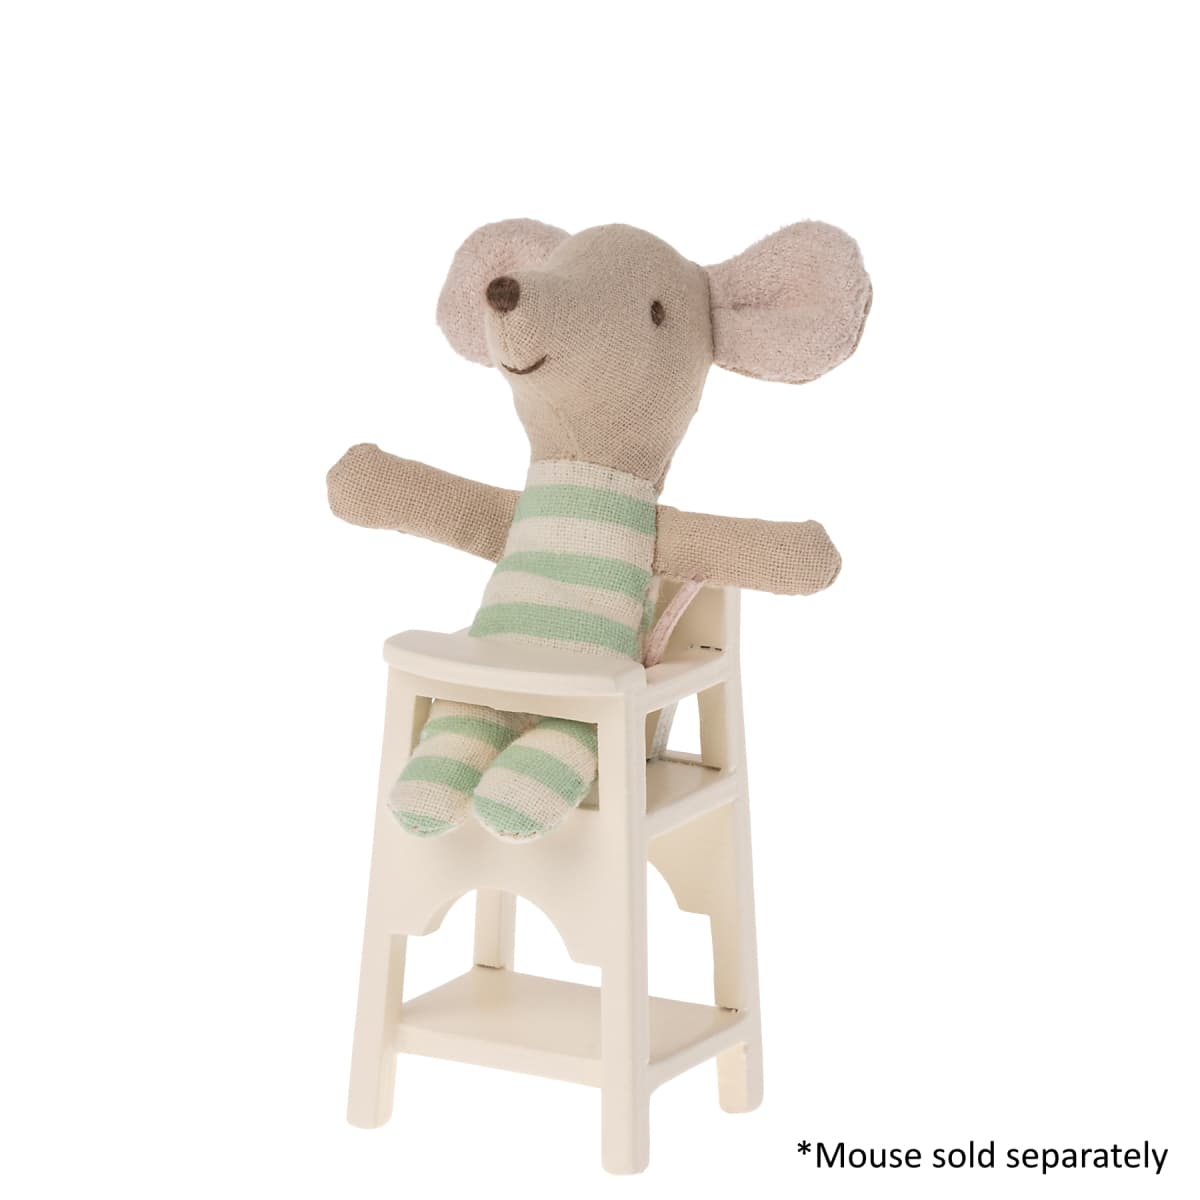 Maileg Baby Mouse Sold Separately